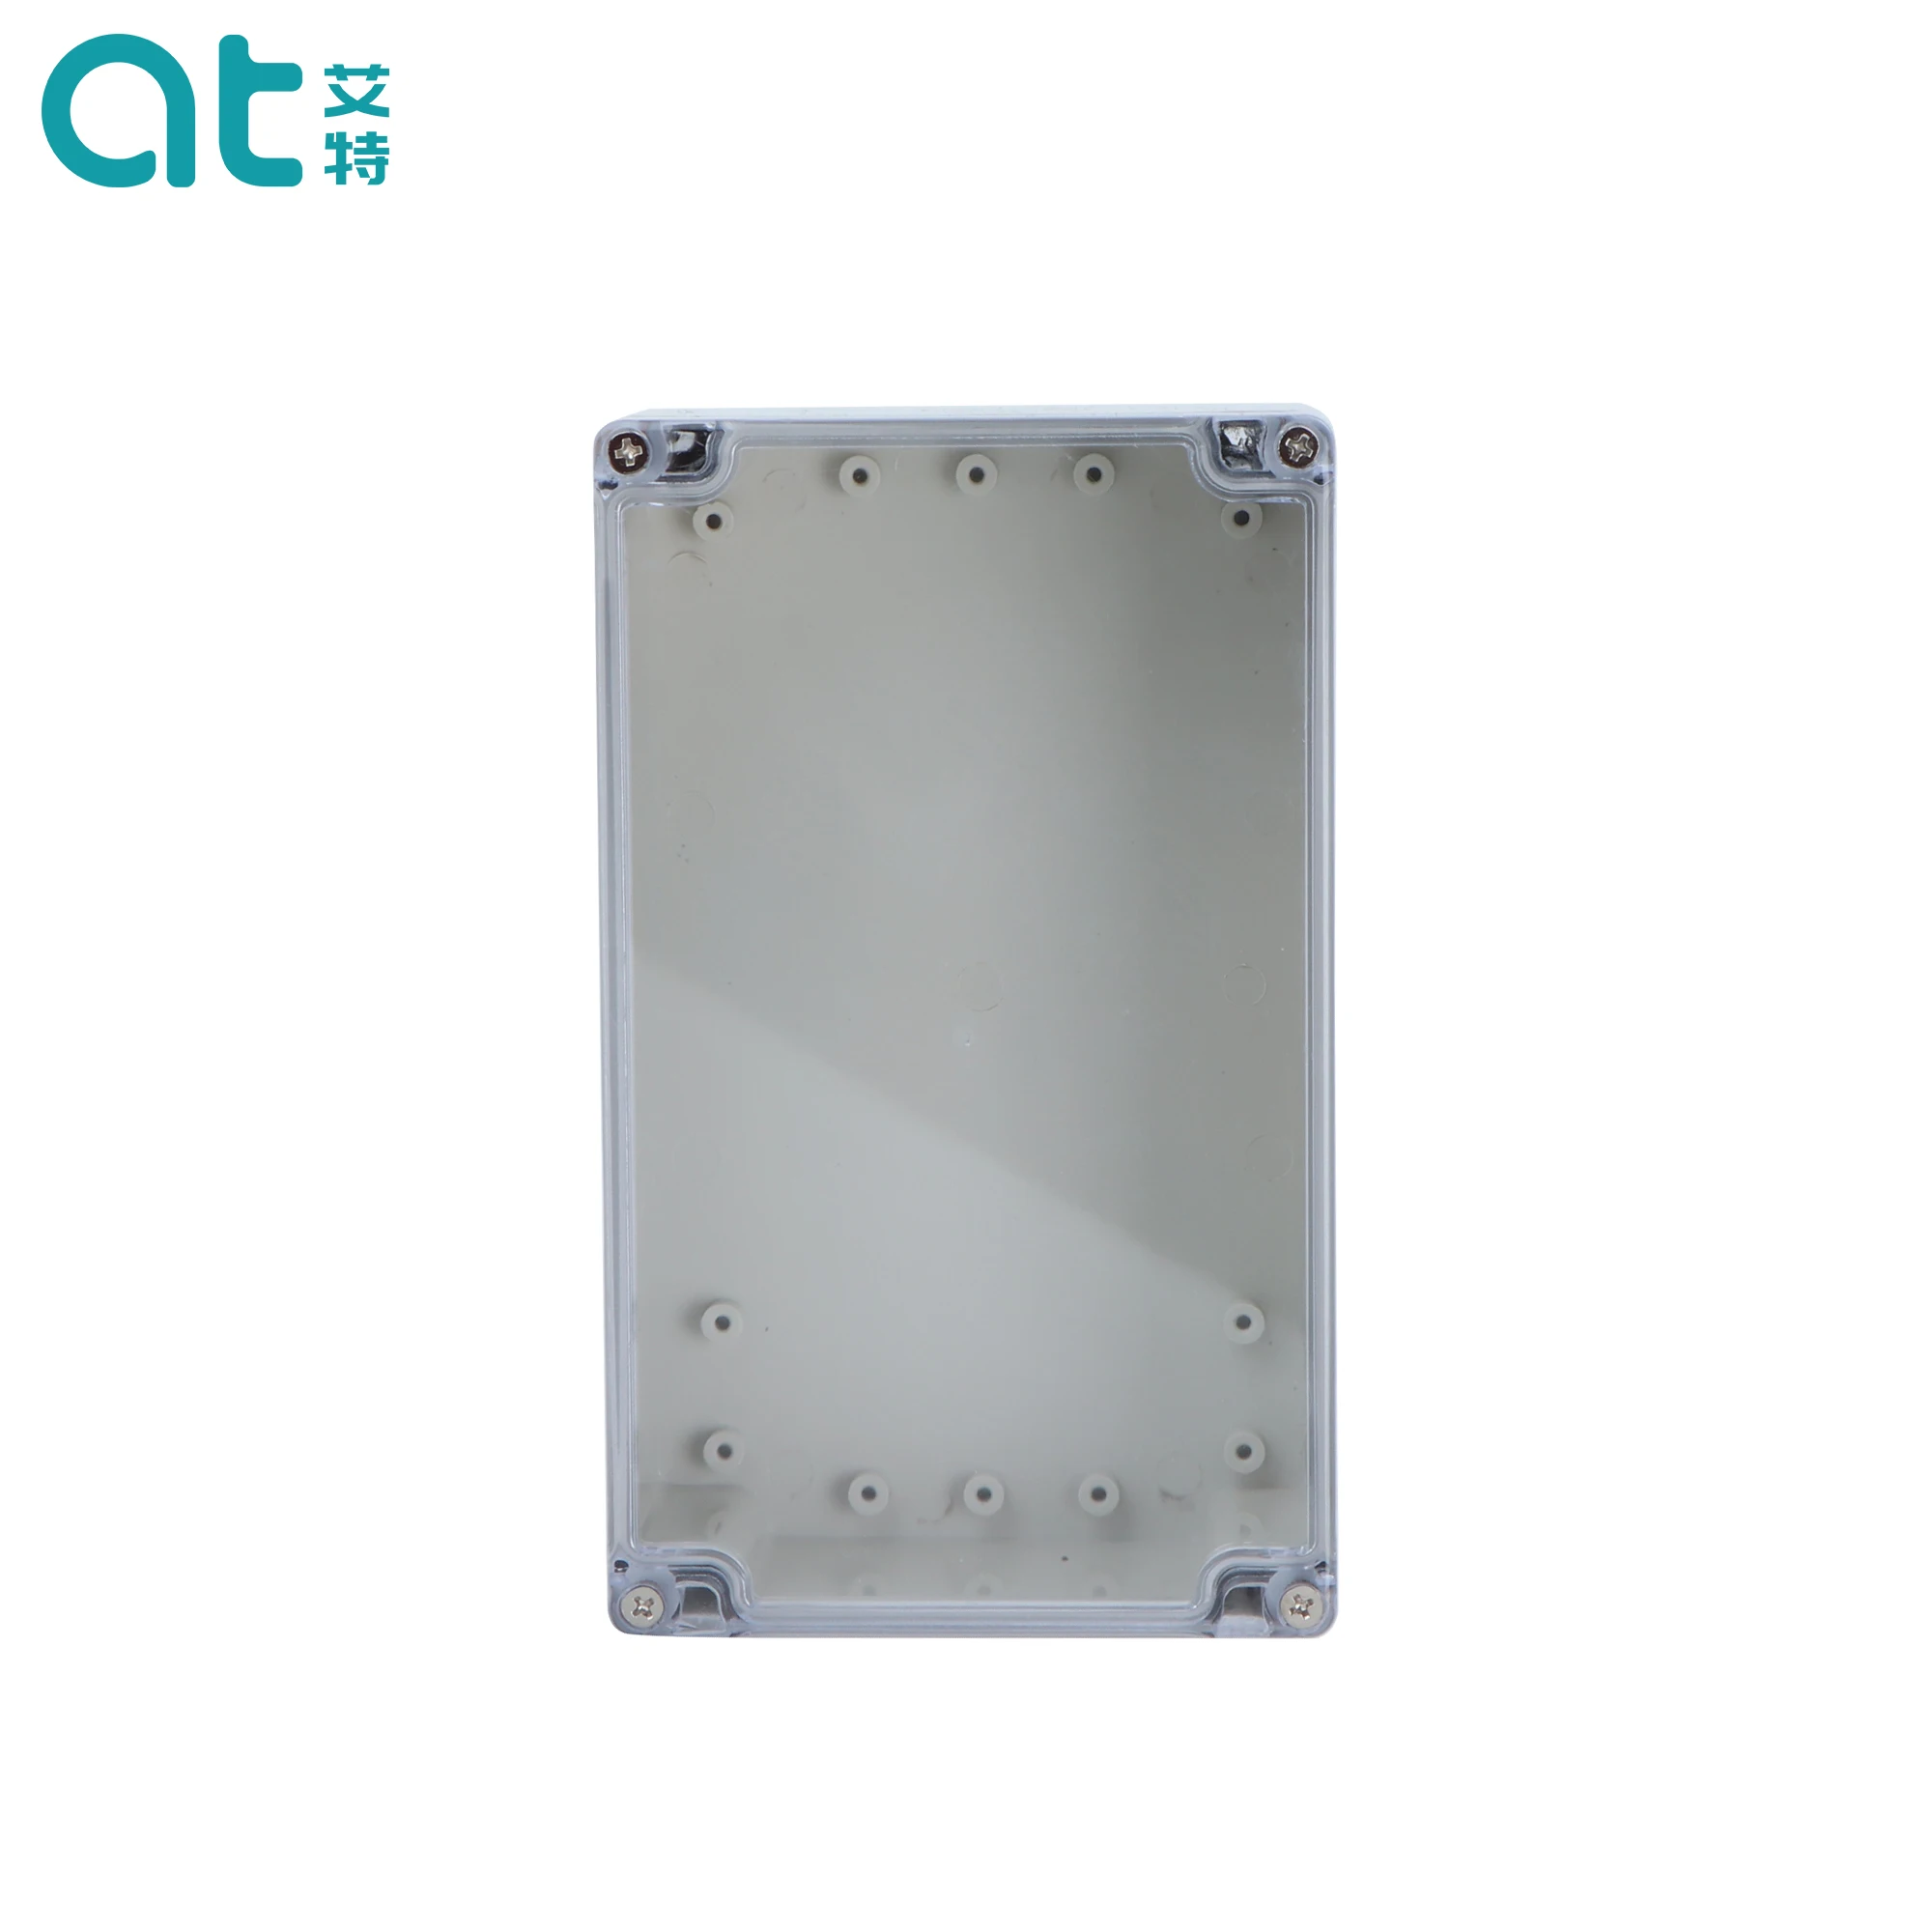 IP65 Series Transparent Cover Outdoor Waterproof DIY Electrical Junction  Box ABS plastic Enclosure Case Distribution box